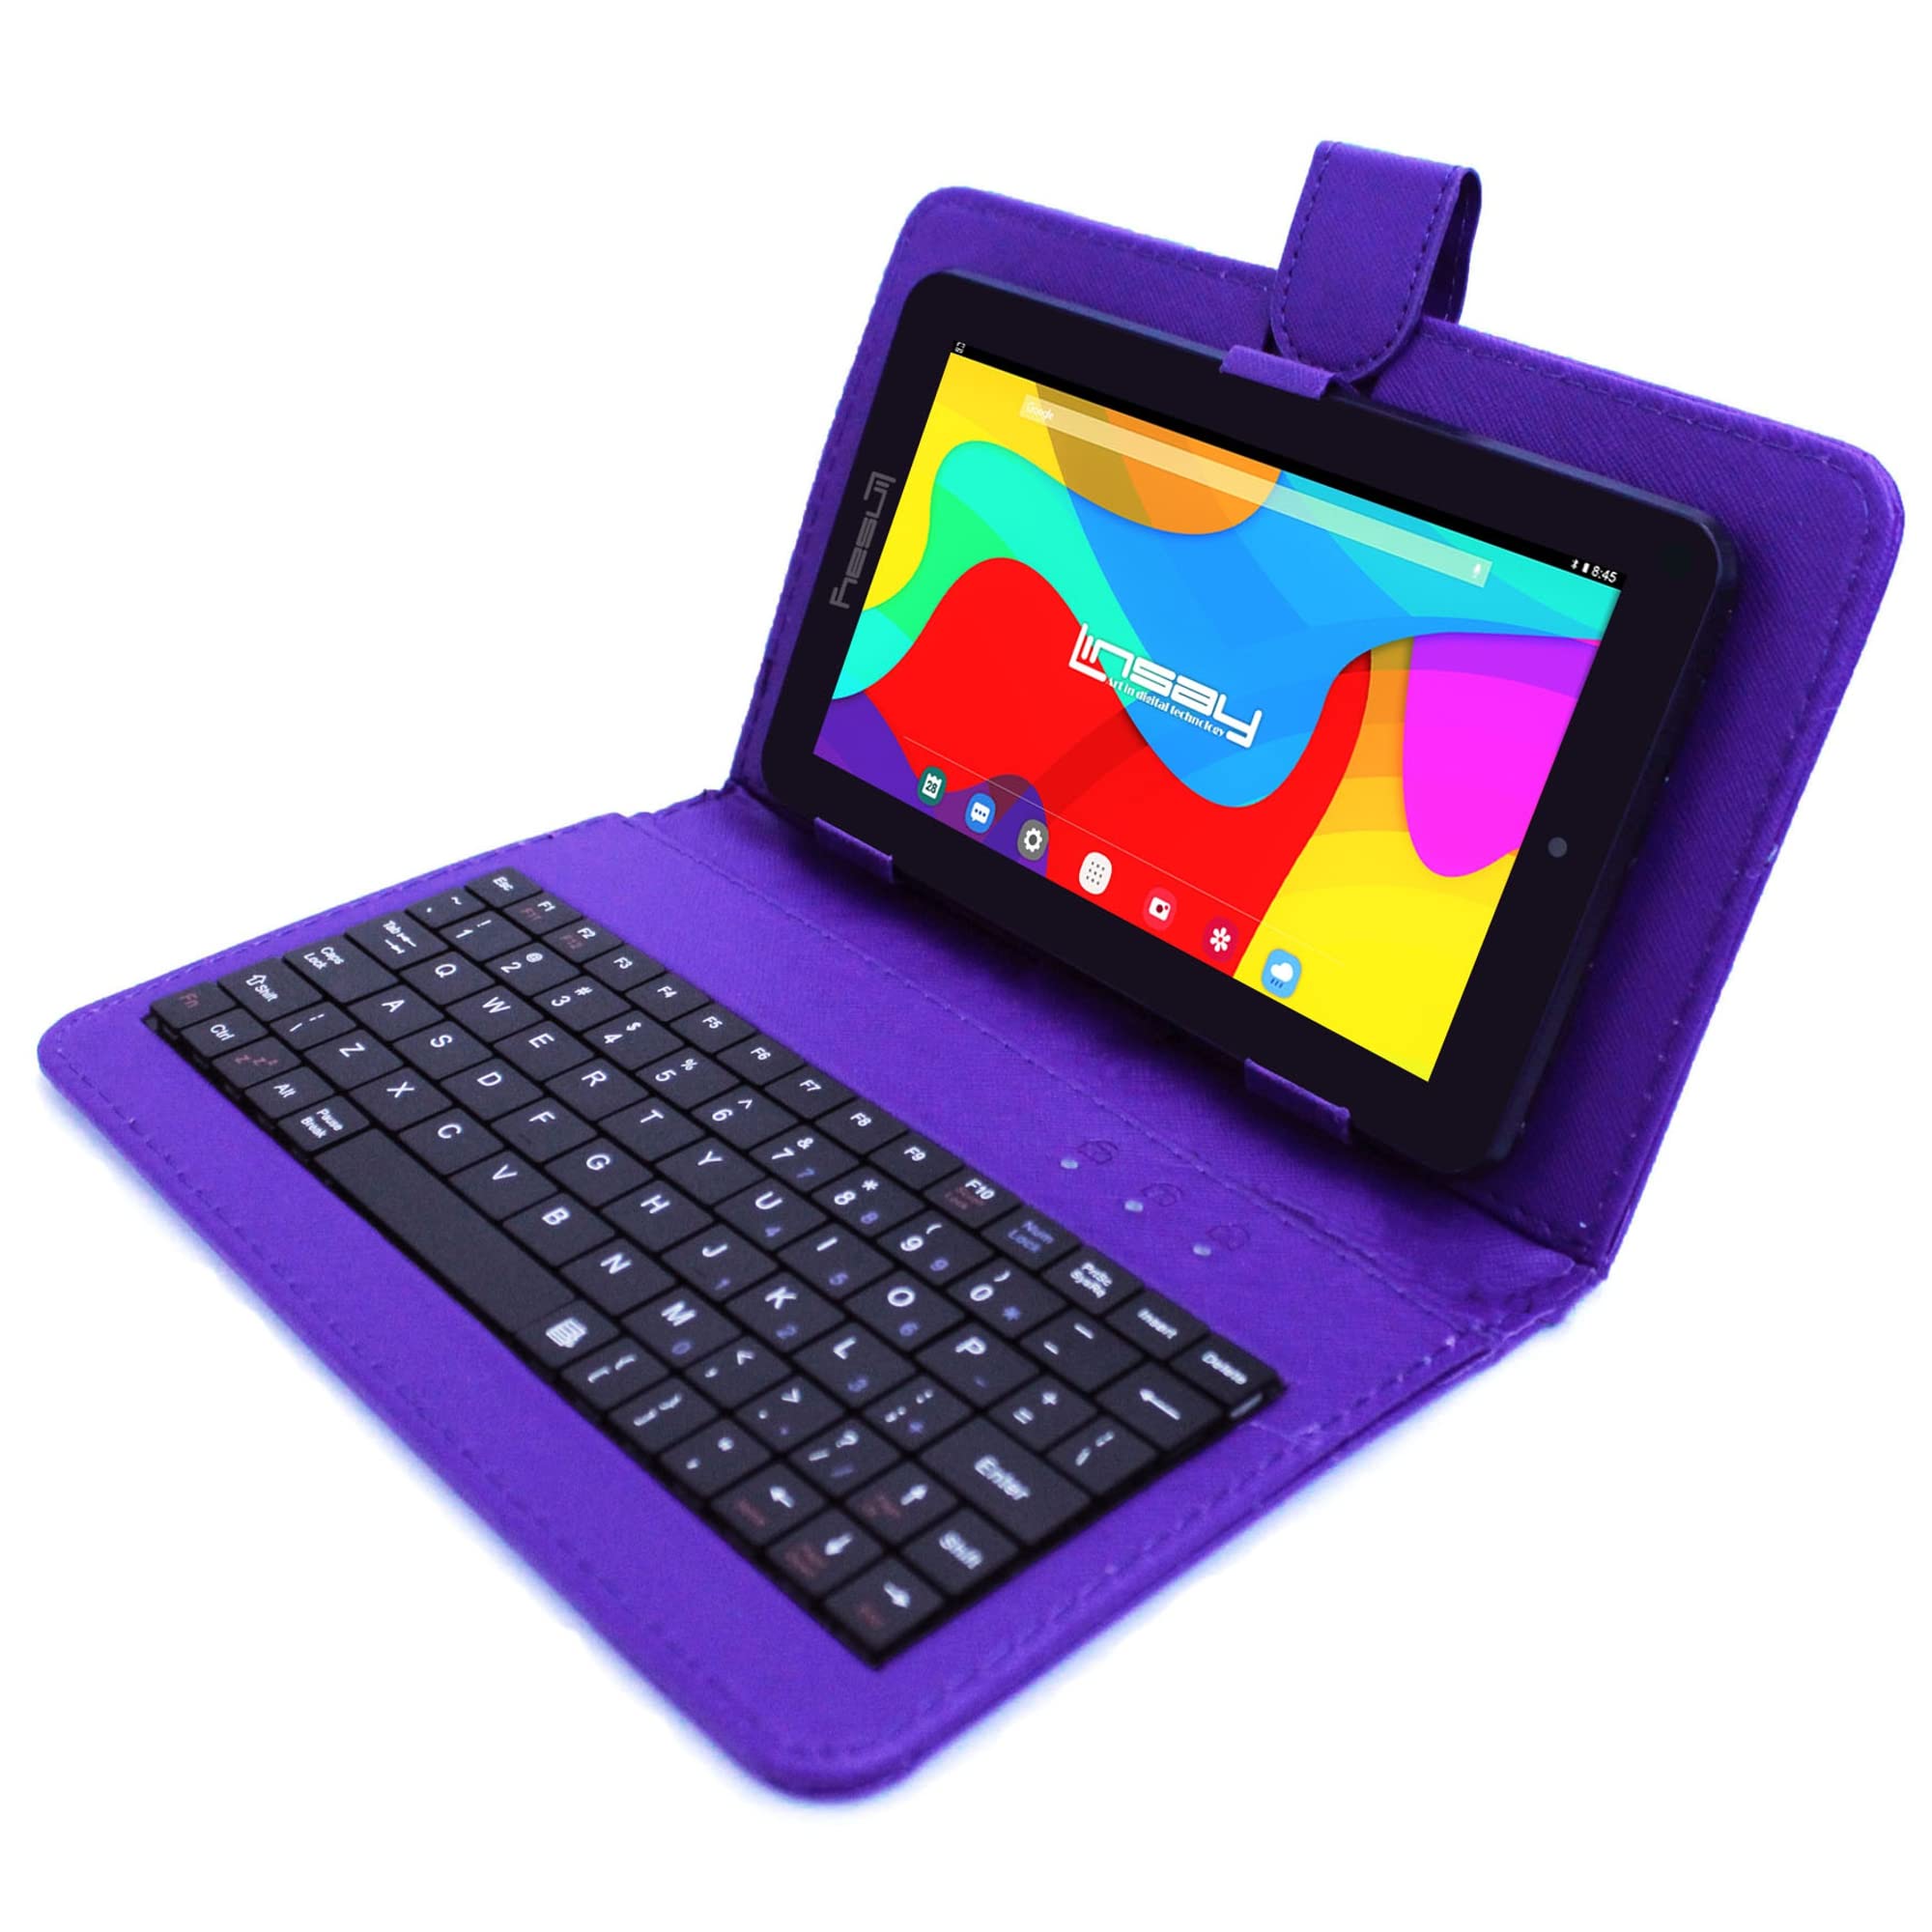 LINSAY 7" 2GB RAM 32GB Storage Android 12 Tablet with Purple Leather Keyboard, Pop Holder and Pen Stylus